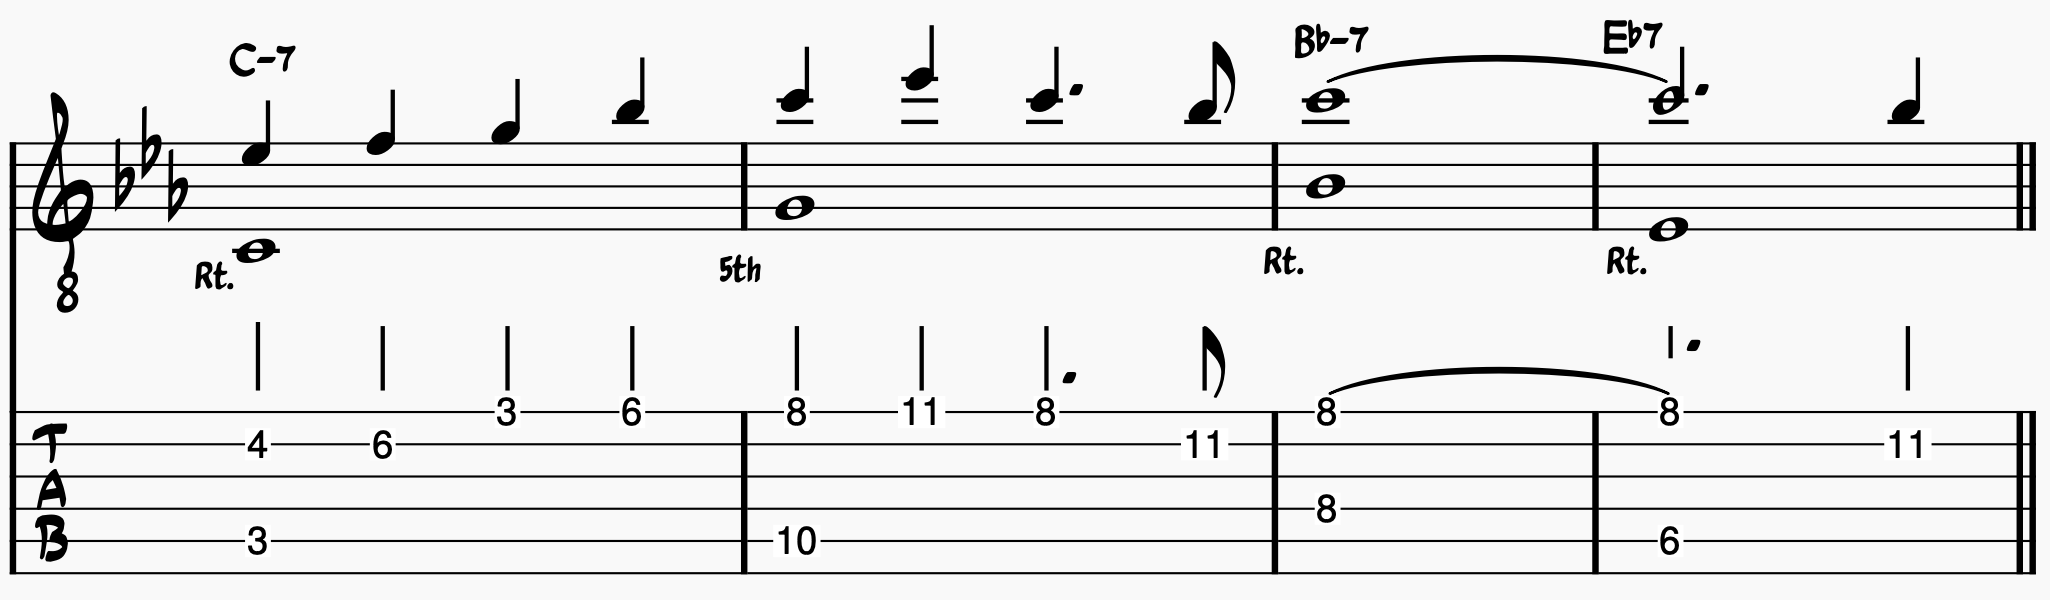 Chord Melody Guitar: There Will Never Be Another You Melody and Bass Notes Version 2; bars 5-8